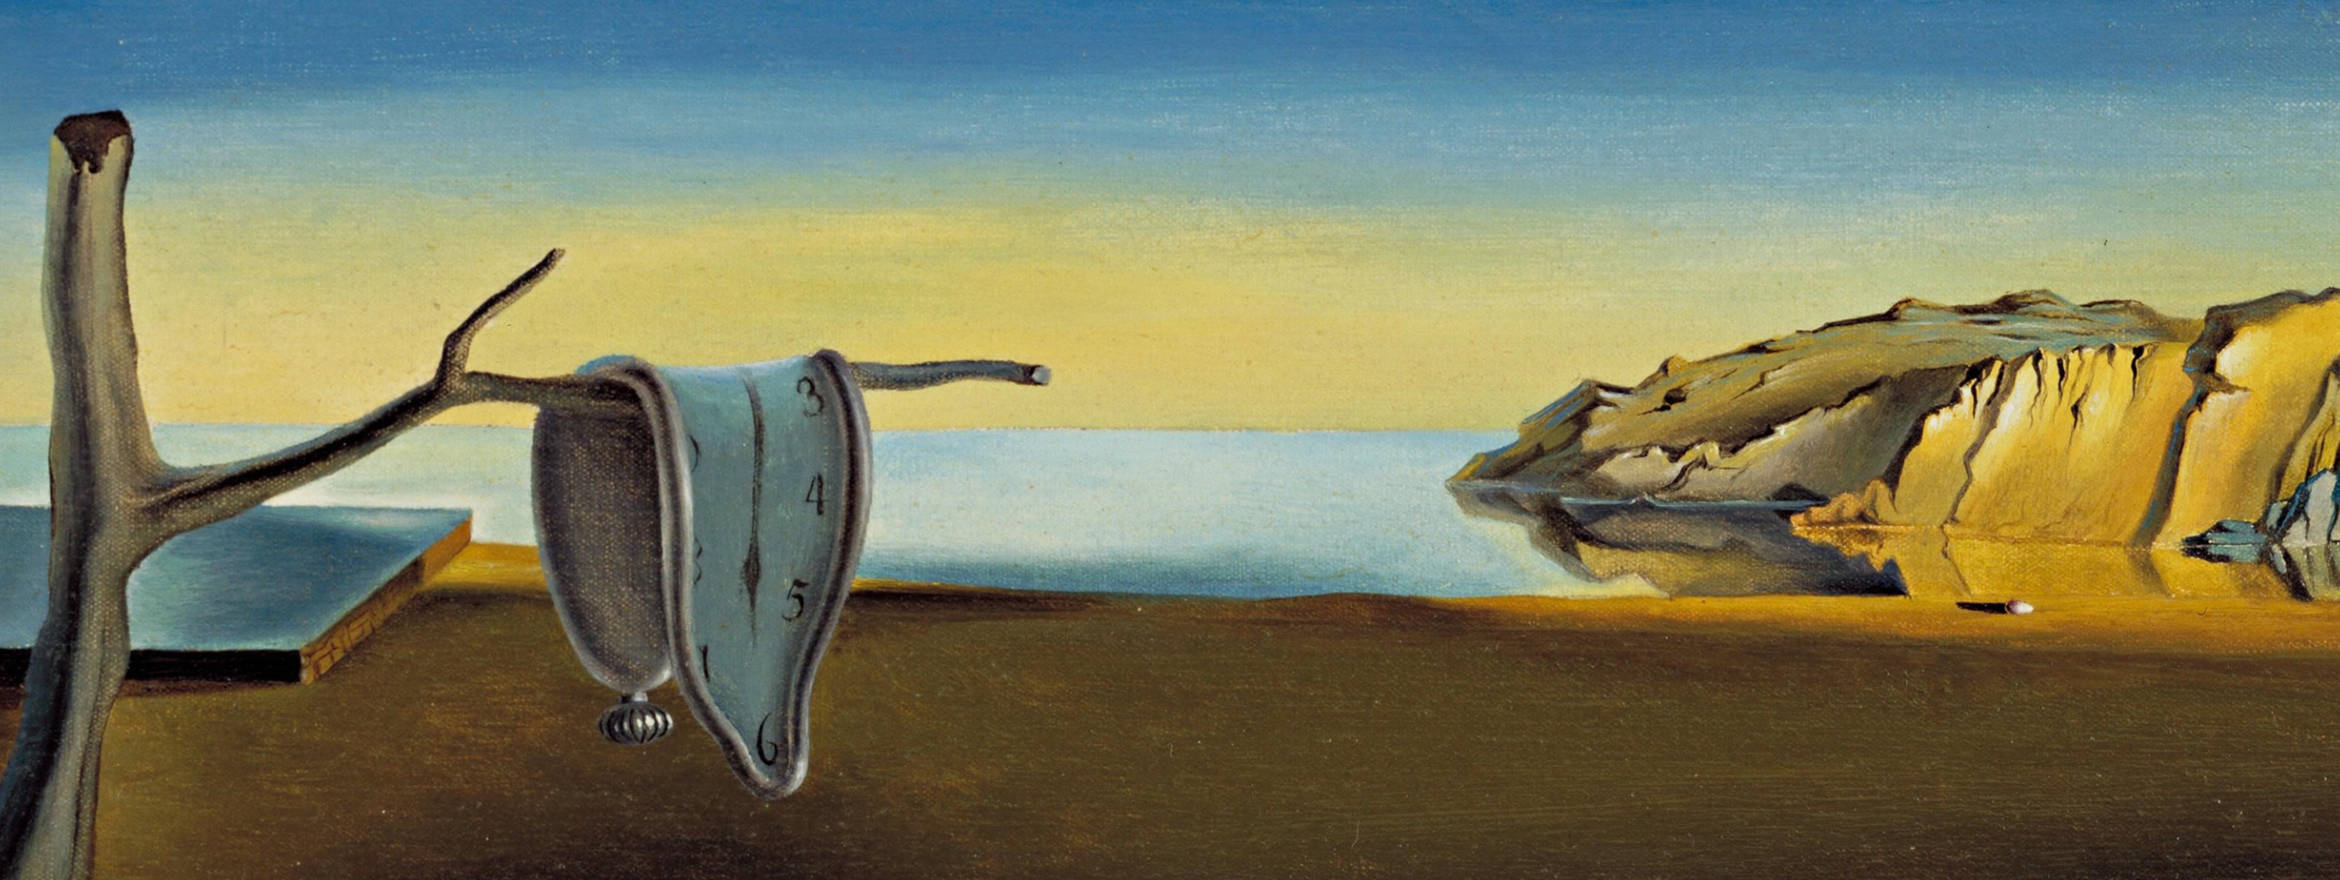 Salvador Dalí’s The Persistence of Memory